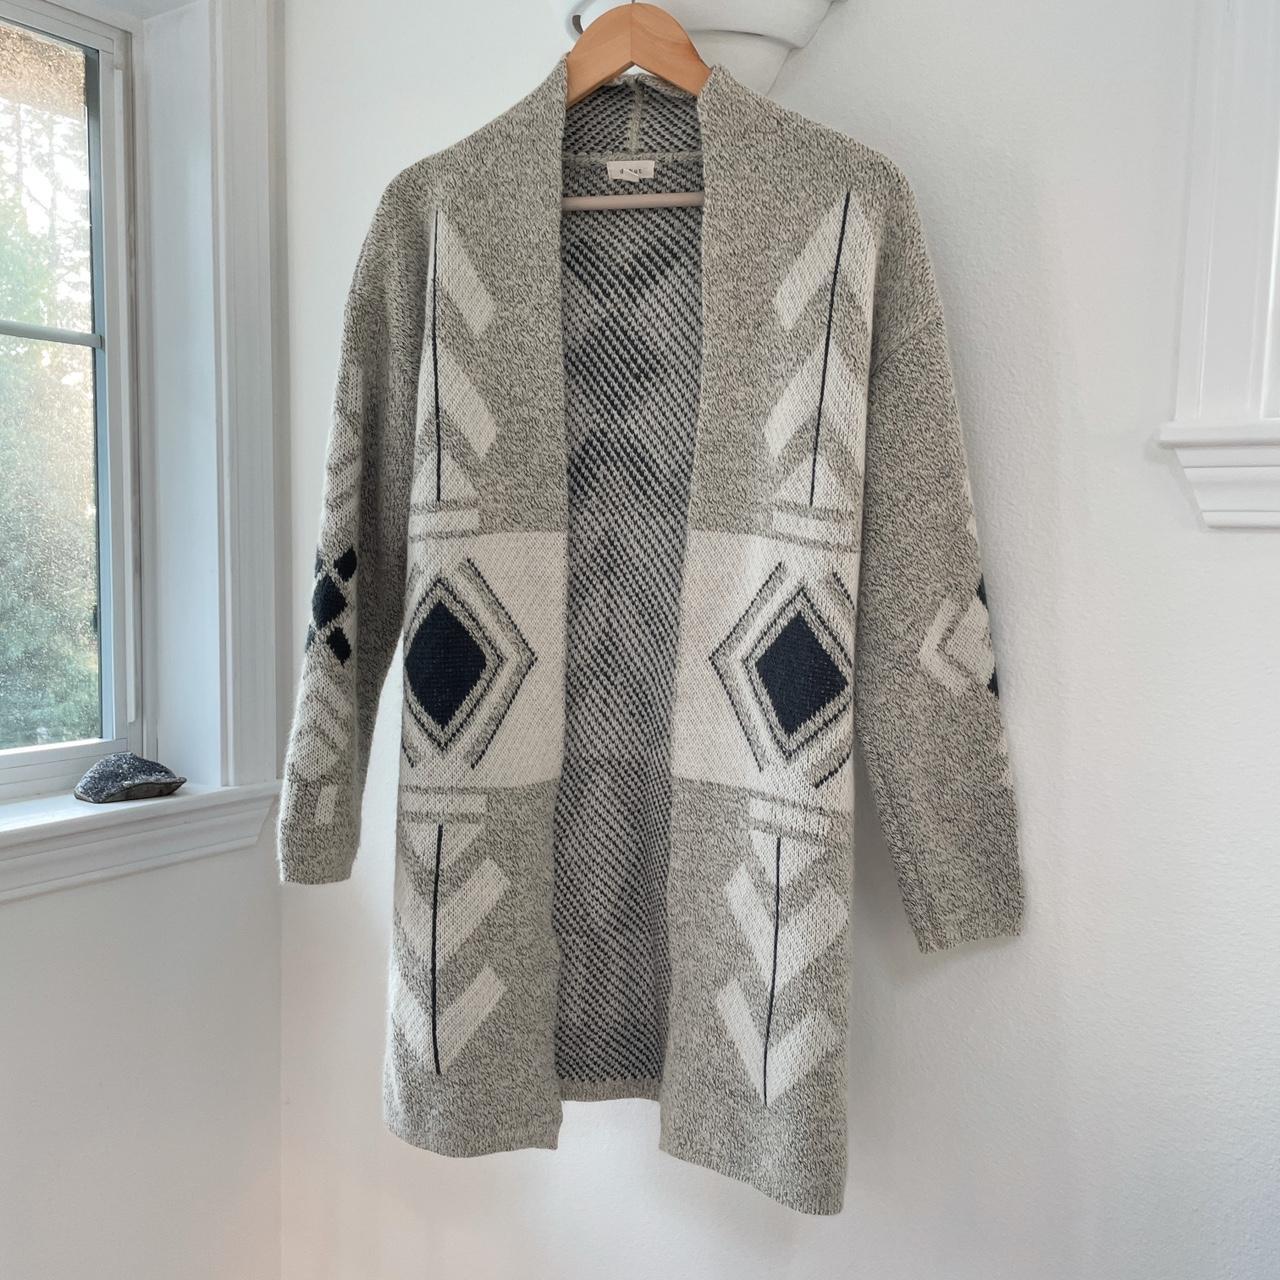 Product Image 1 - printed wrap sweater, grey, white